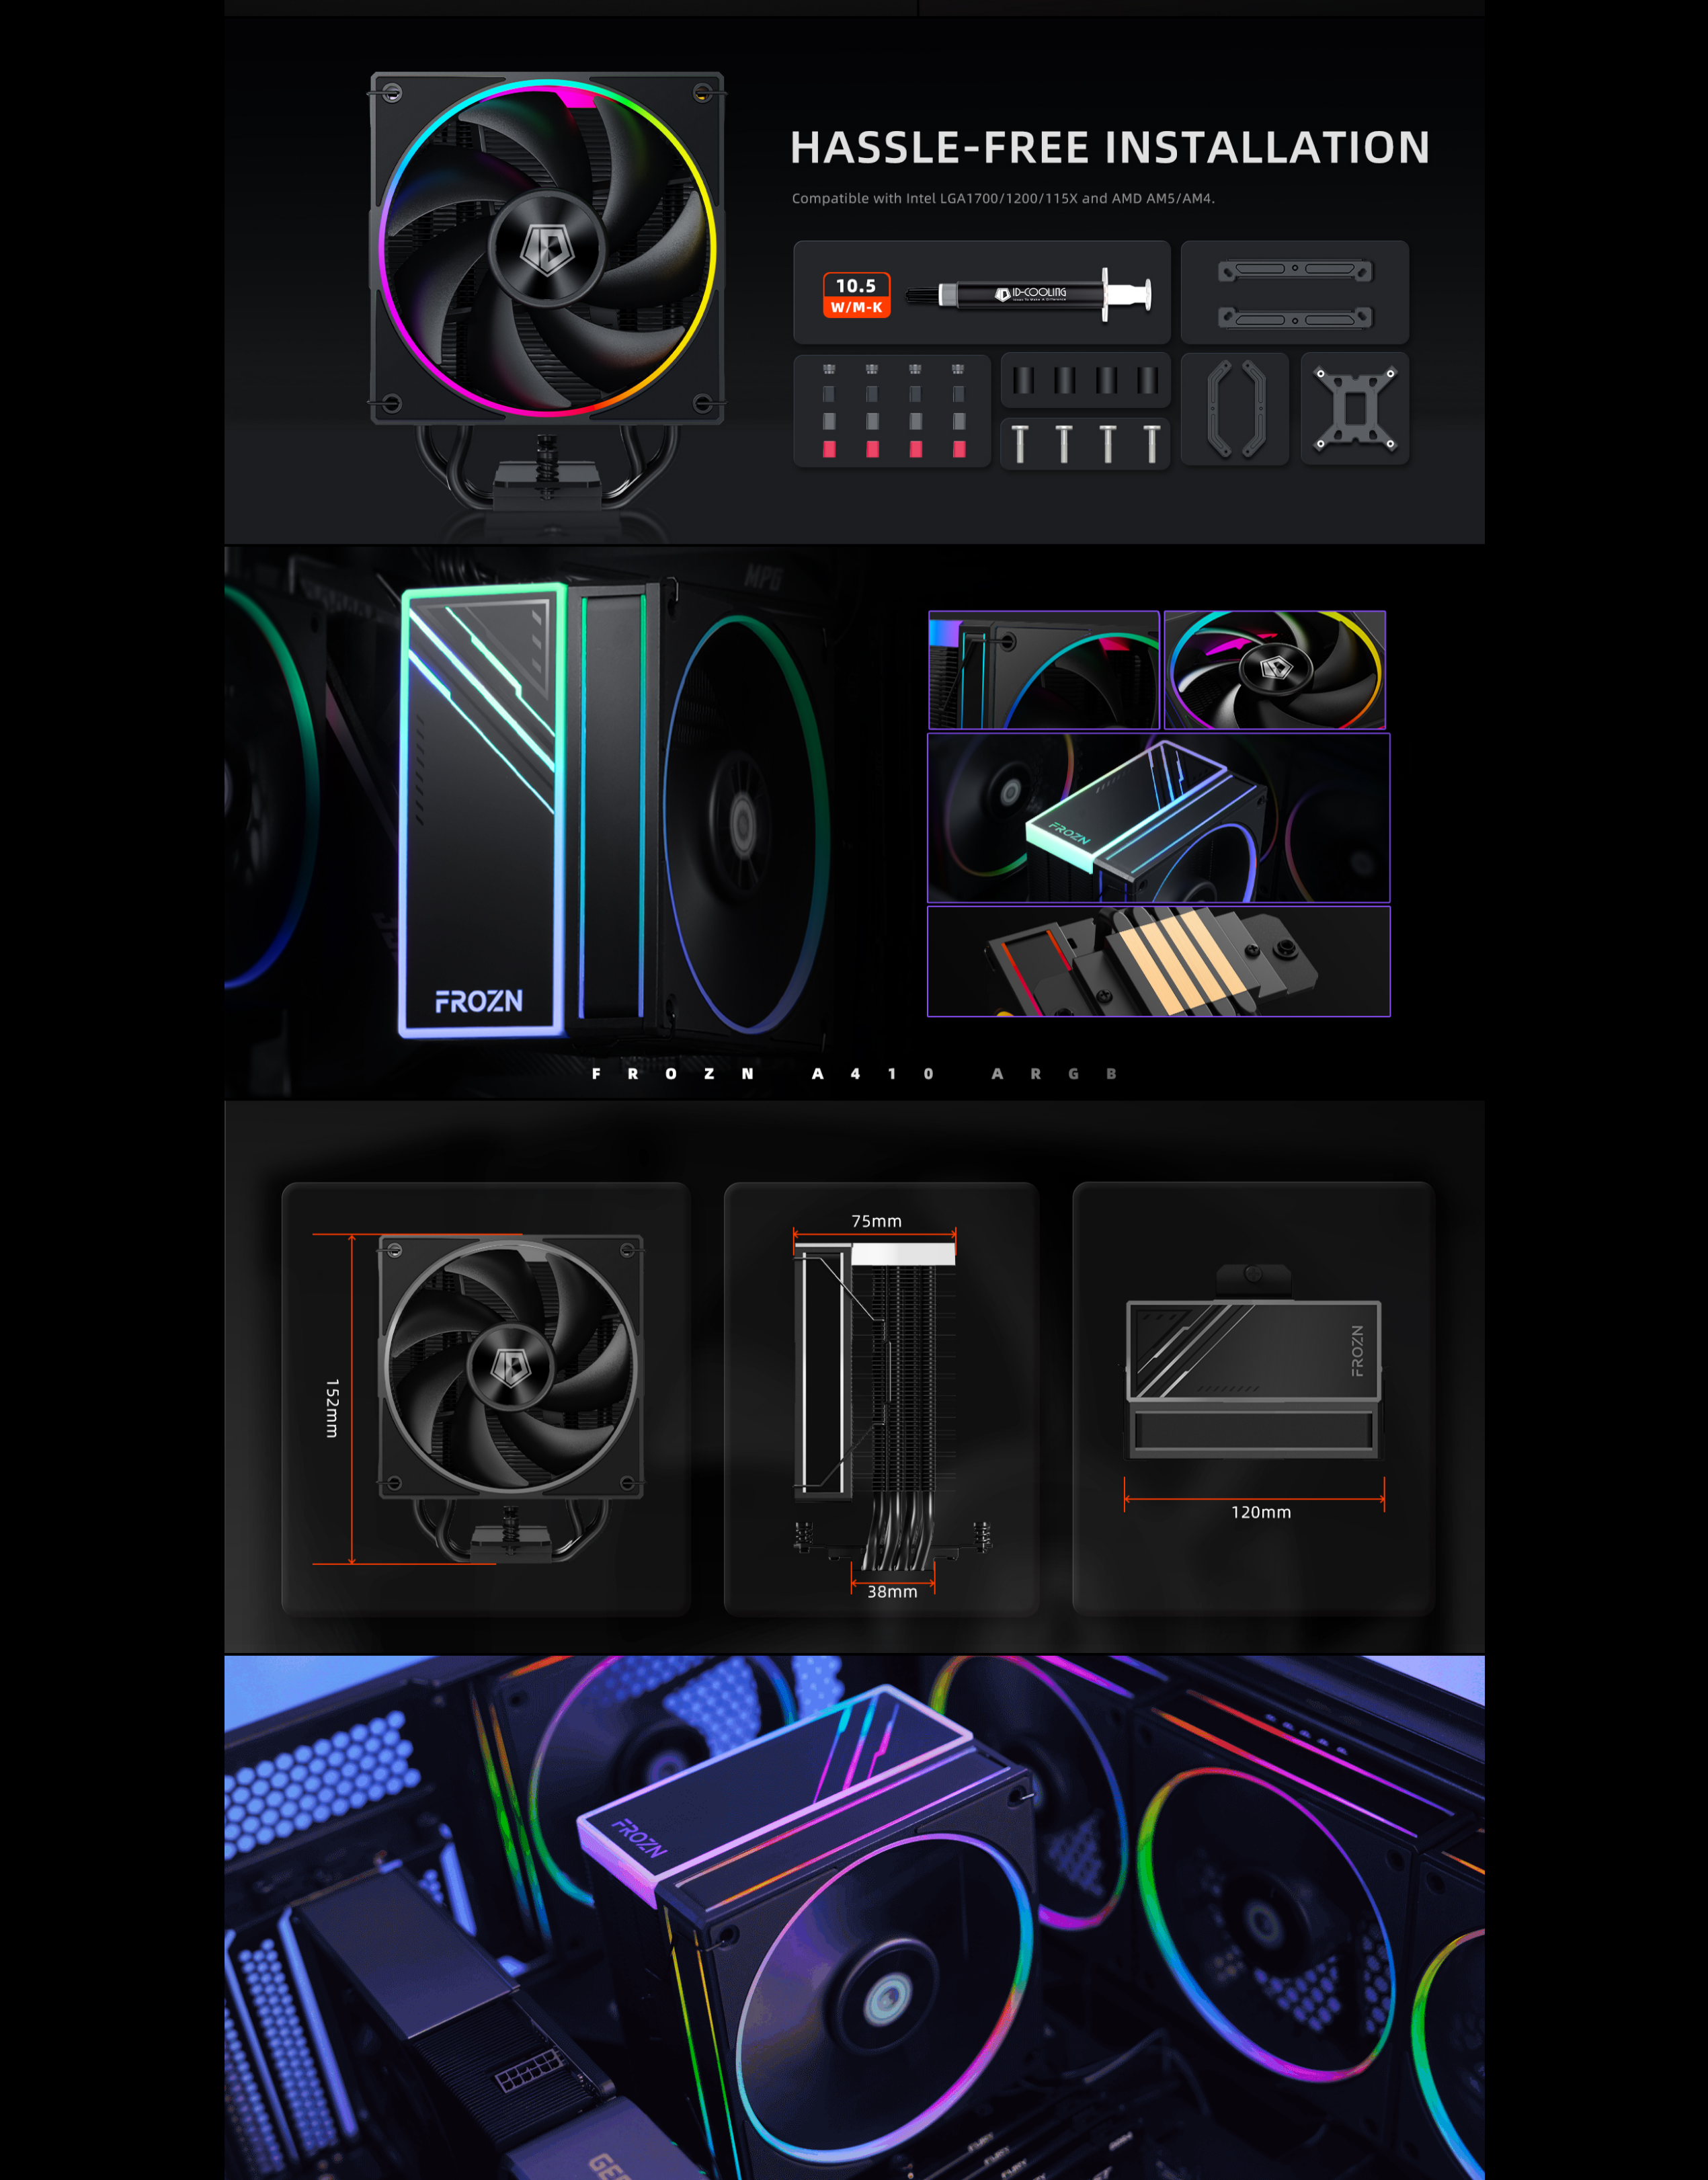 A large marketing image providing additional information about the product ID-COOLING FROZN A410 ARGB CPU Cooler - Black - Additional alt info not provided